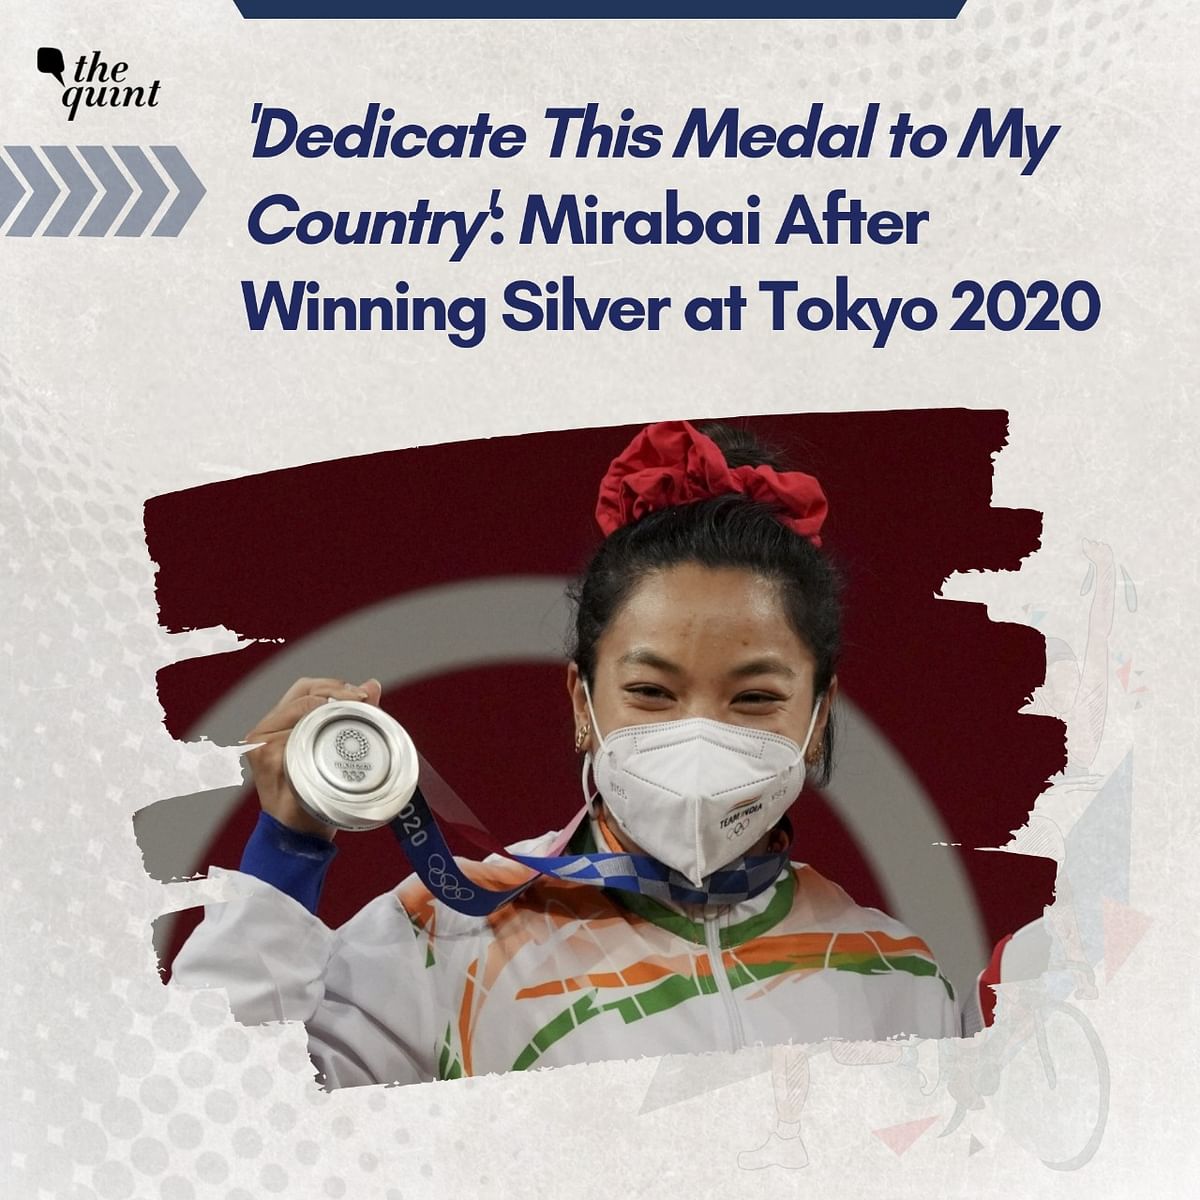 Mirabai Chanu won India's first weightlifting Olympic medal at the Olympic Games since 2000 in Sydney.  